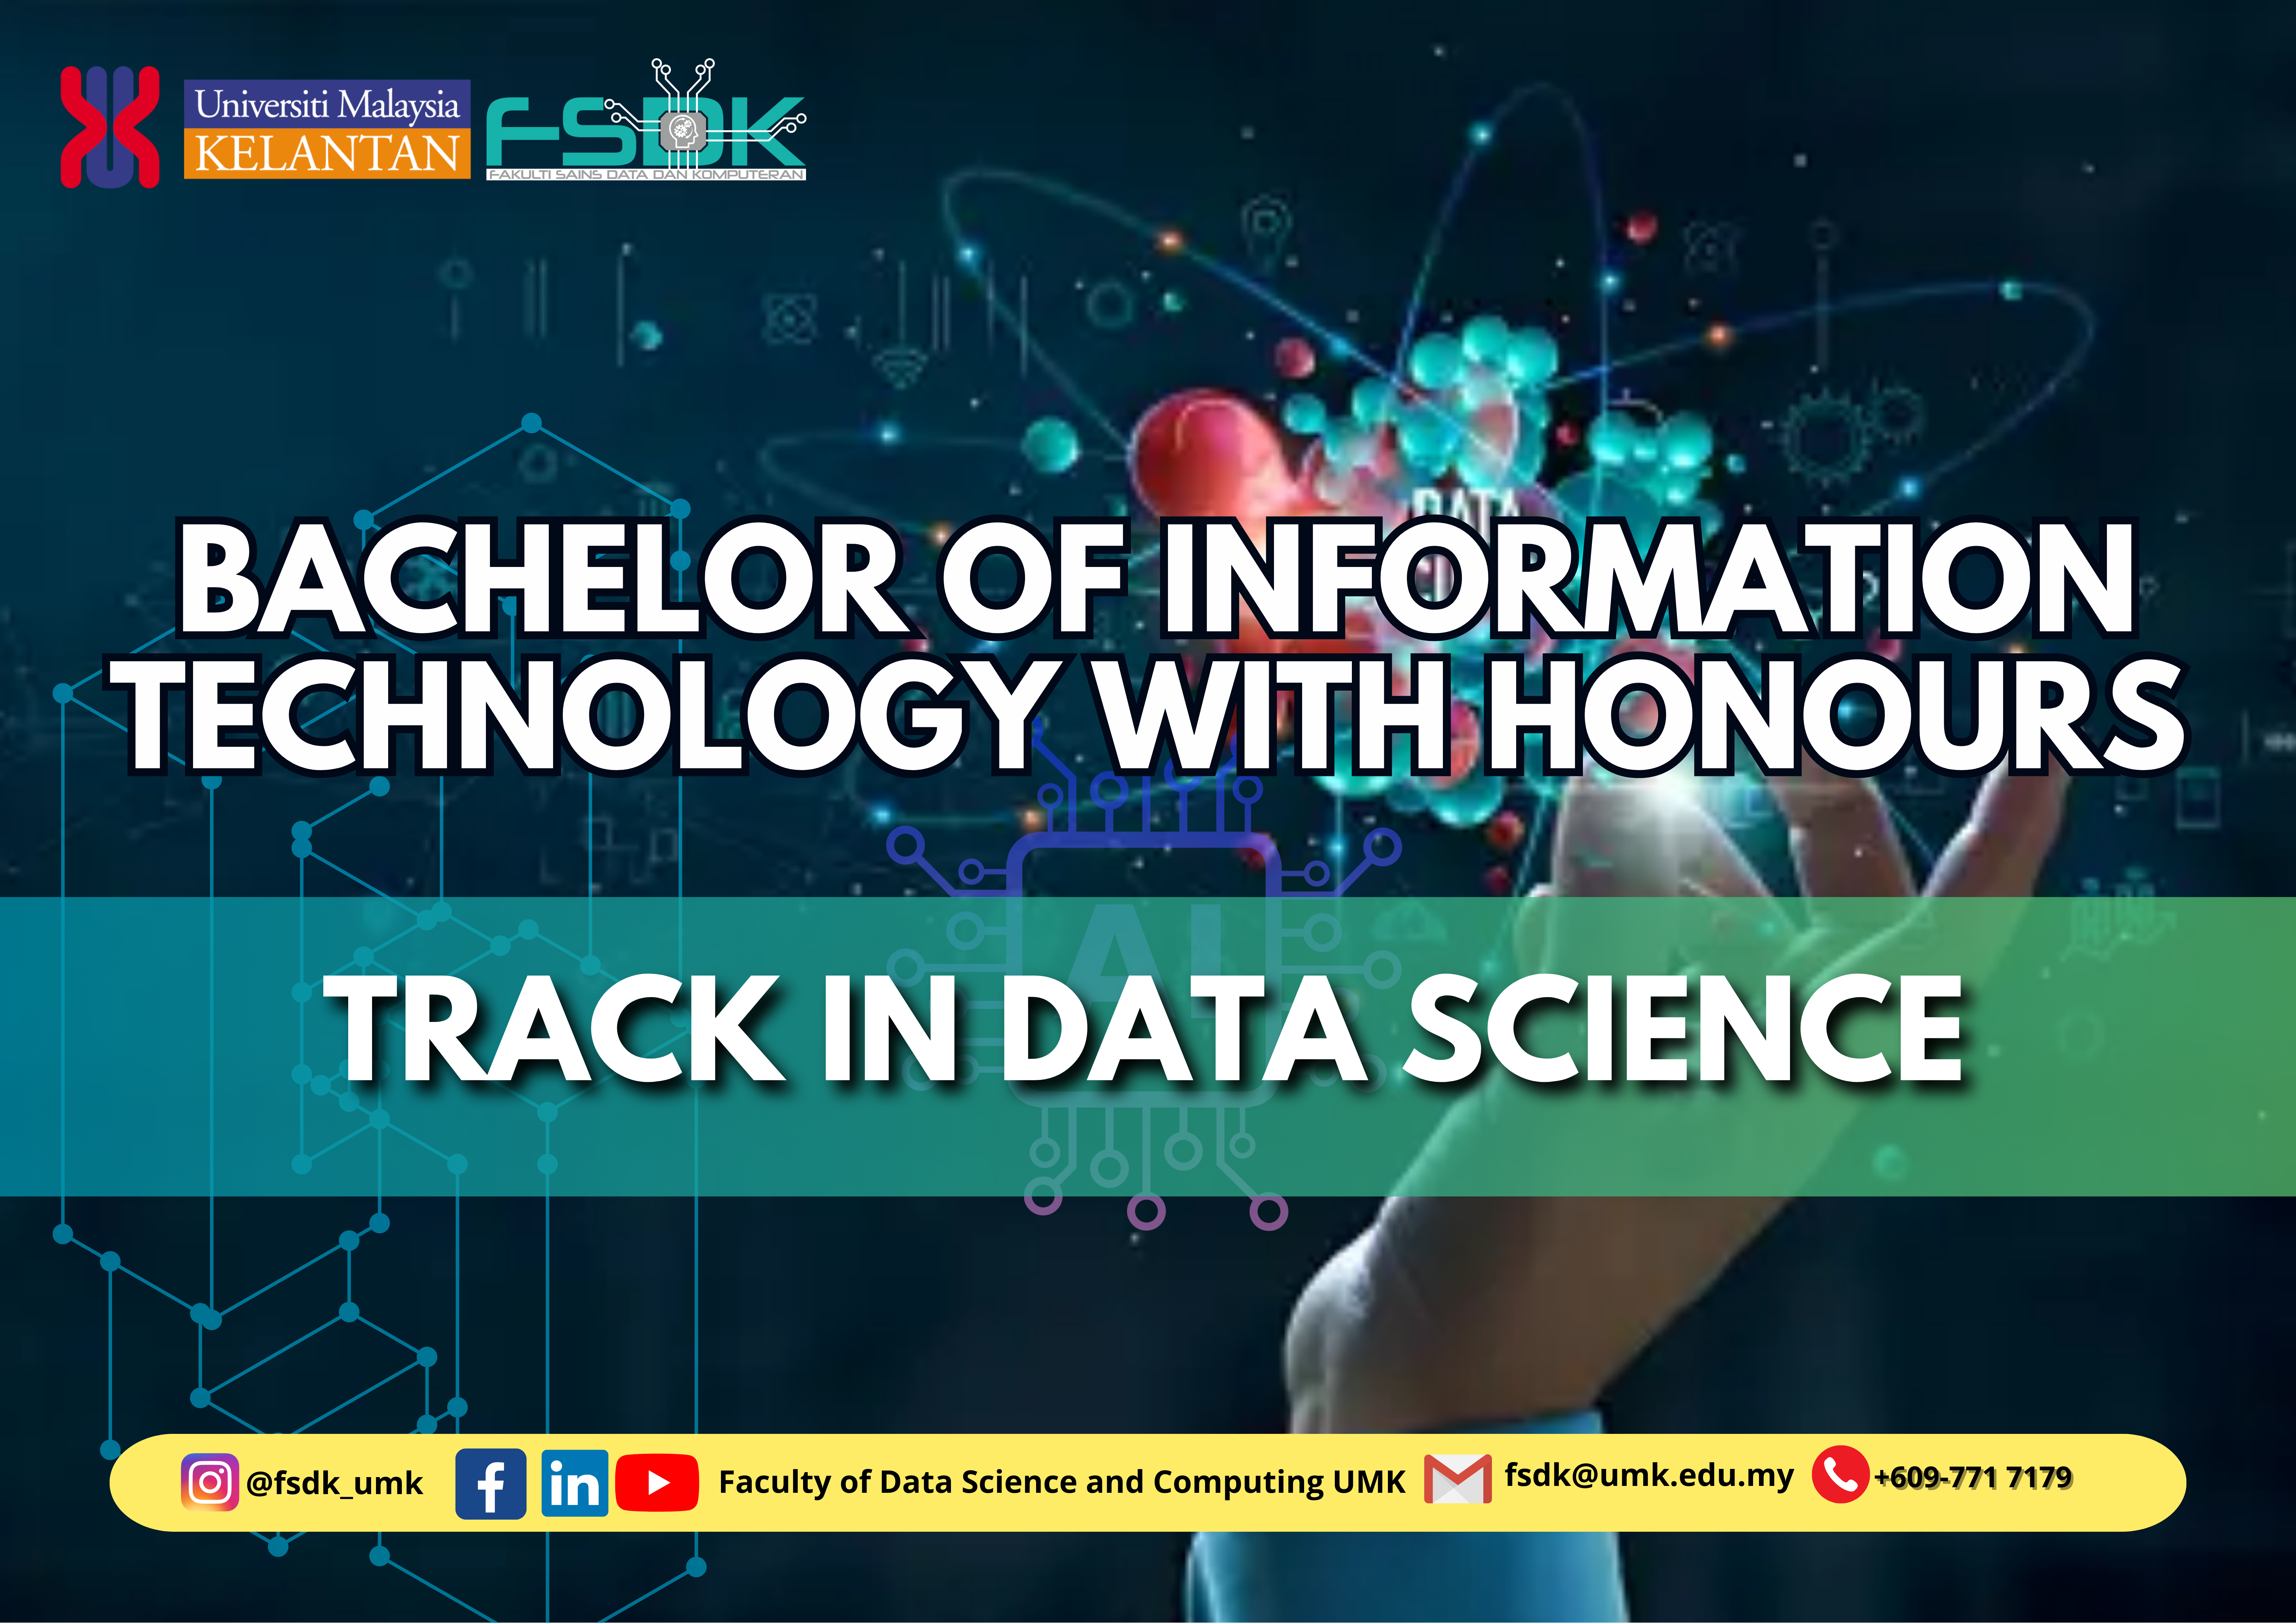 BACHELOR OF INFORMATION TECHNOLOGY WITH HONOUR (TRACK IN DATA SCIENCE)